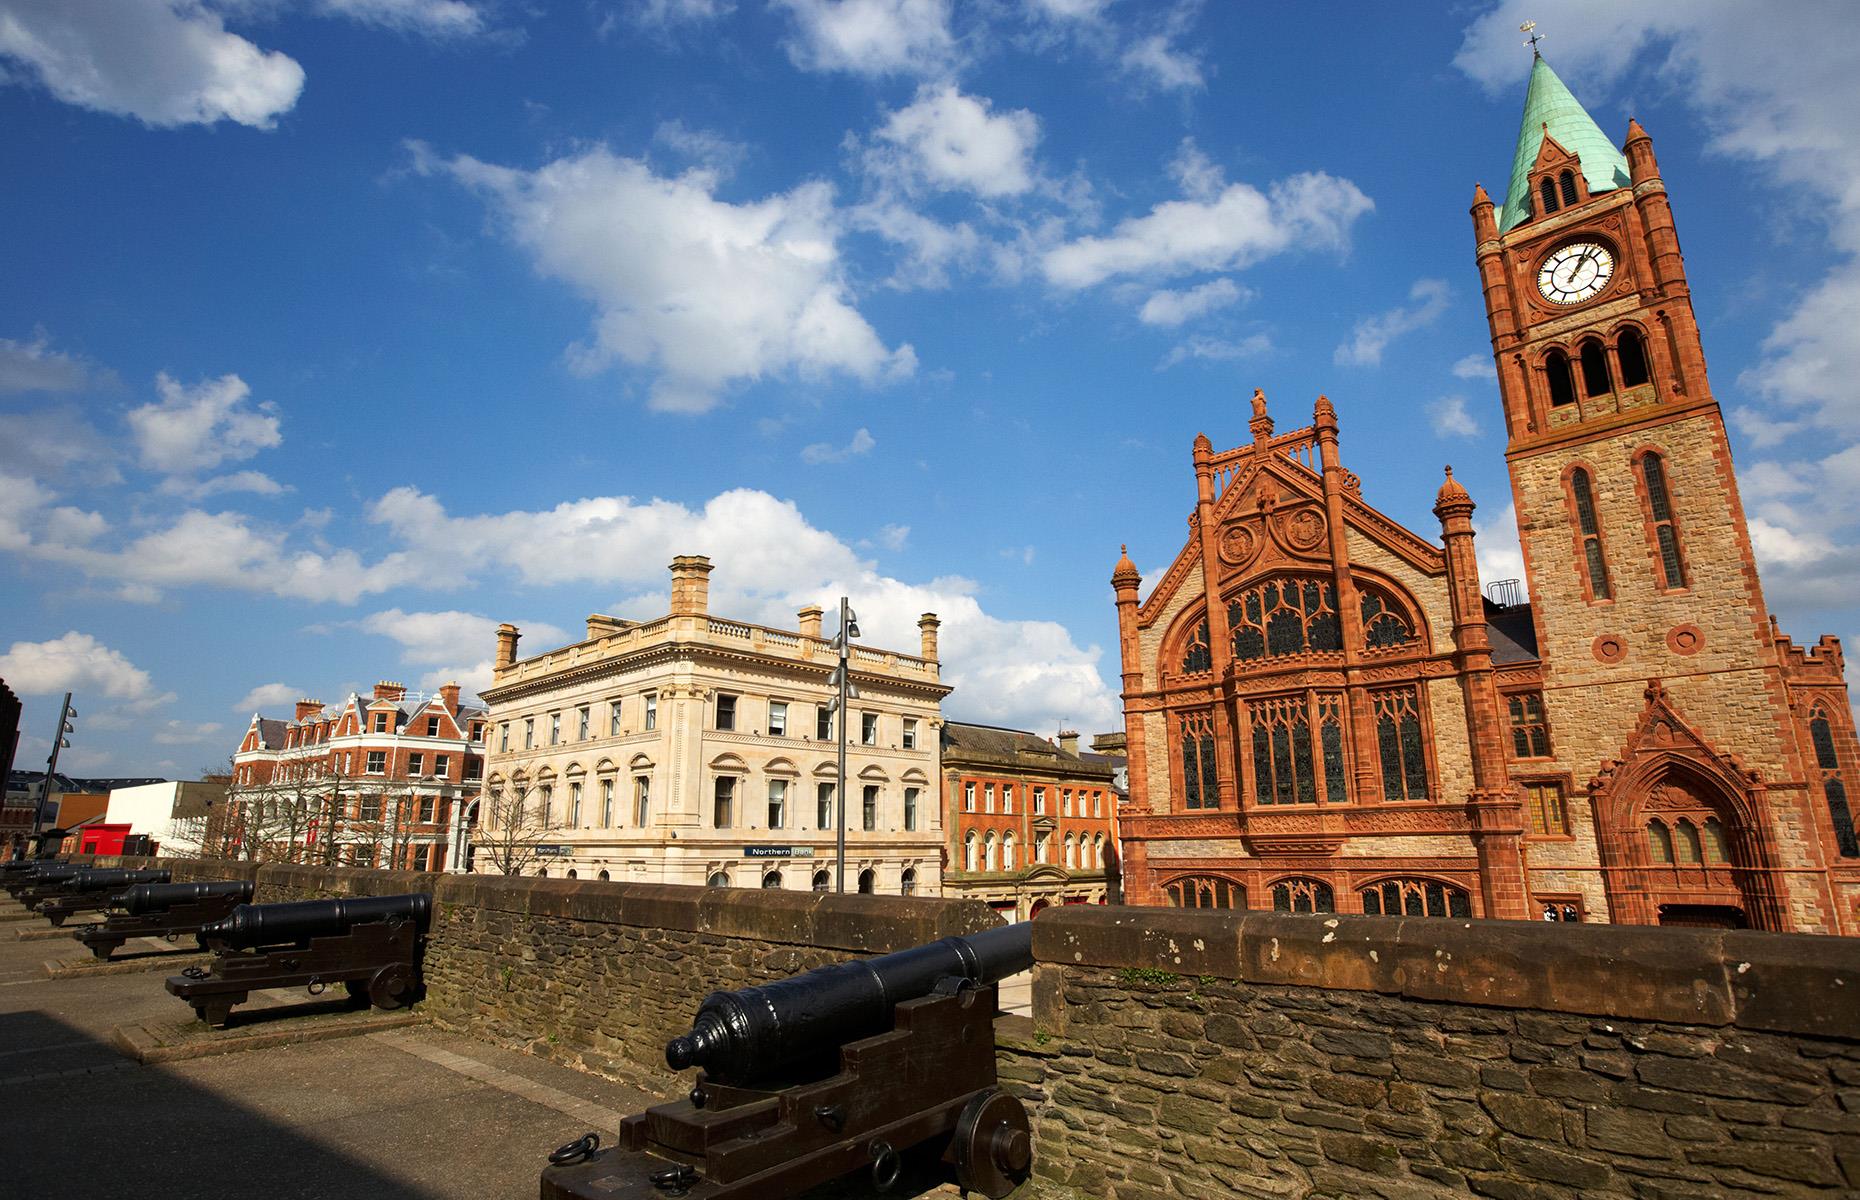 <p>In the historic walled city of Derry/Londonderry, you’ll have the chance to experience all that the inaugural UK City of Culture has to offer. The best way to do this is to take a tour of the city walls themselves.</p>  <p>Join a <a href="https://www.derrycitytours.com/">City Walking Tour</a> for an engaging, unbiased journey through Derry/Londonderry's history, from its Christian settlement in the 6<sup>th</sup> century, up through the Troubles including Bloody Sunday, to its current reputation as a seat of music, hospitality, and peace.</p>